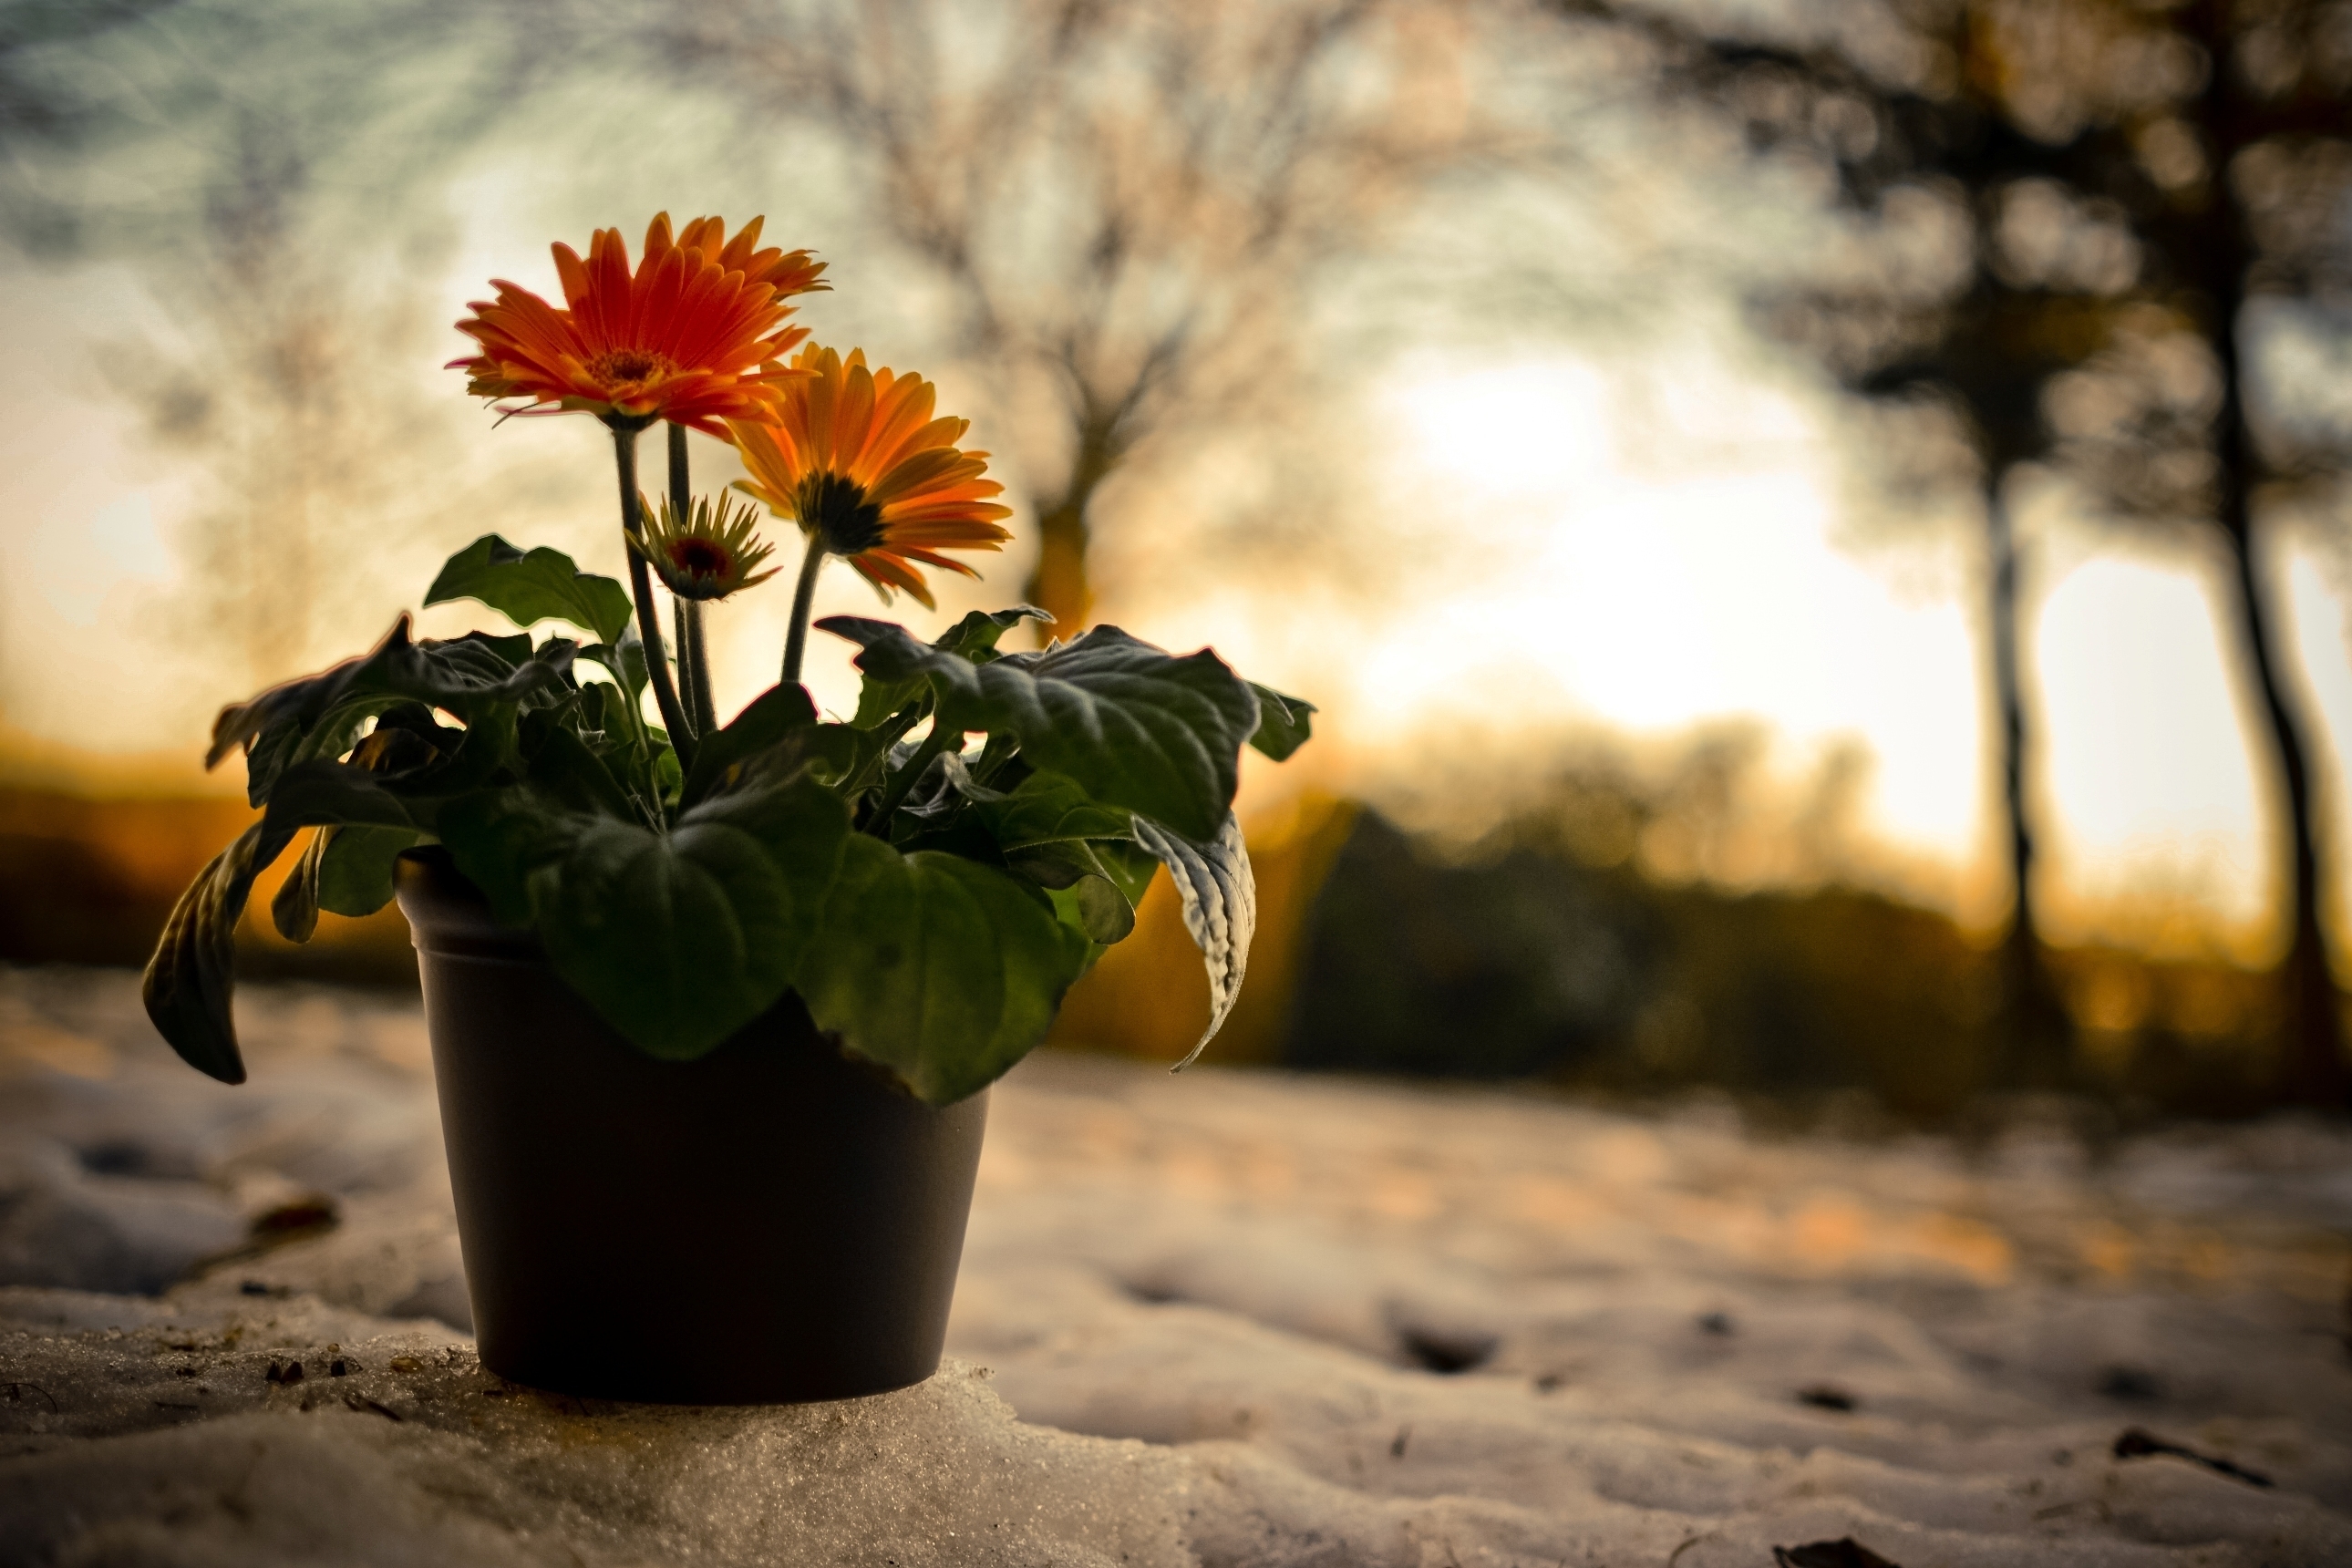 64071 download wallpaper nature, flowers, sunset, snow, gerberas, evening, pot screensavers and pictures for free